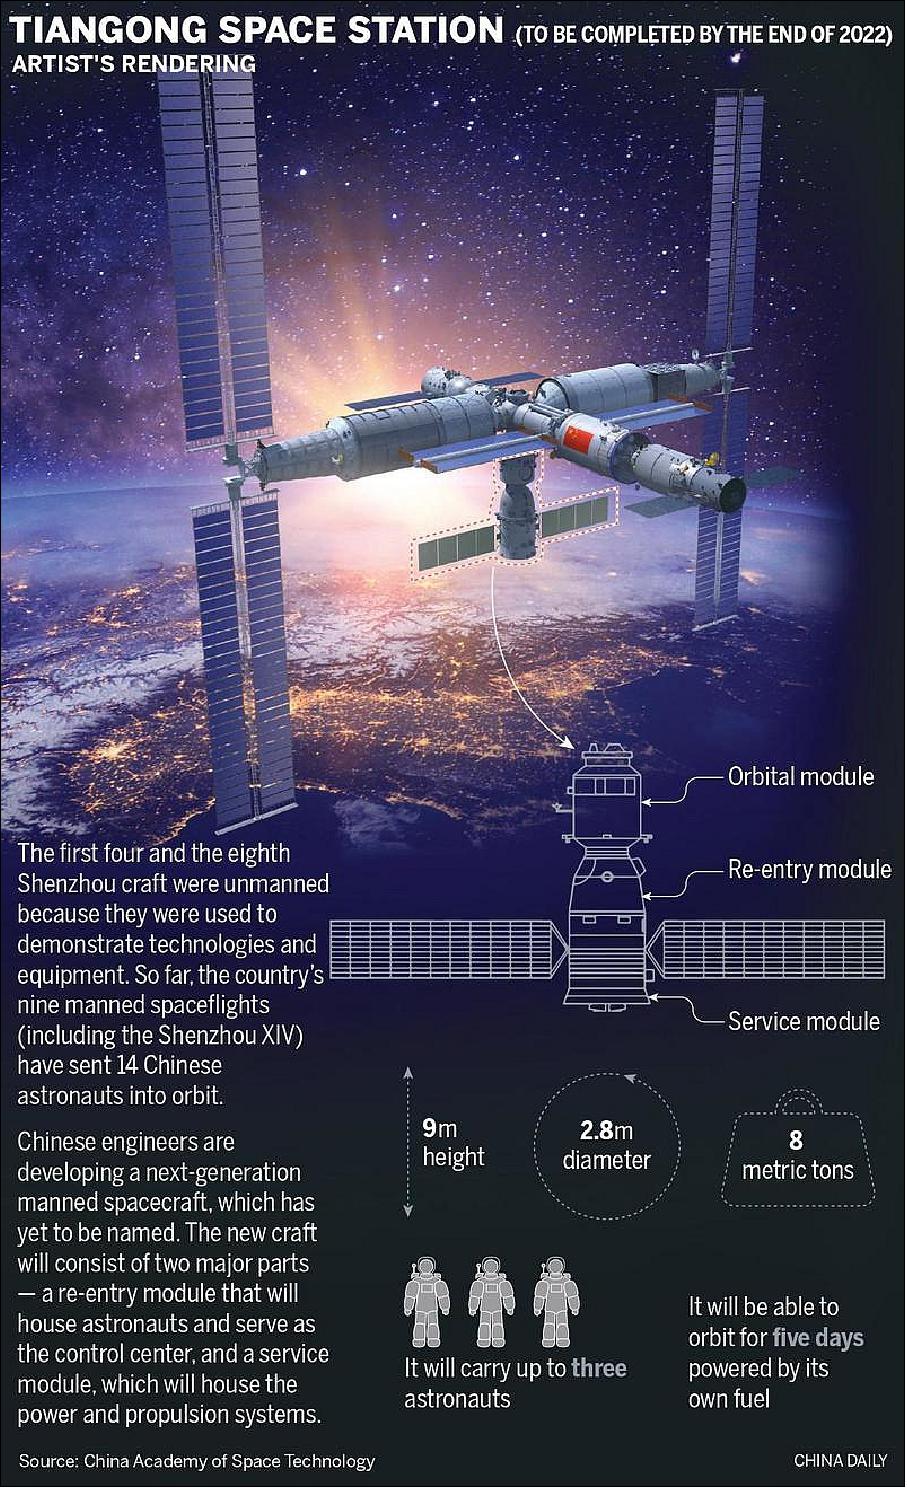 Figure 16: The Tiangong Space Station (image credit: China Daily)